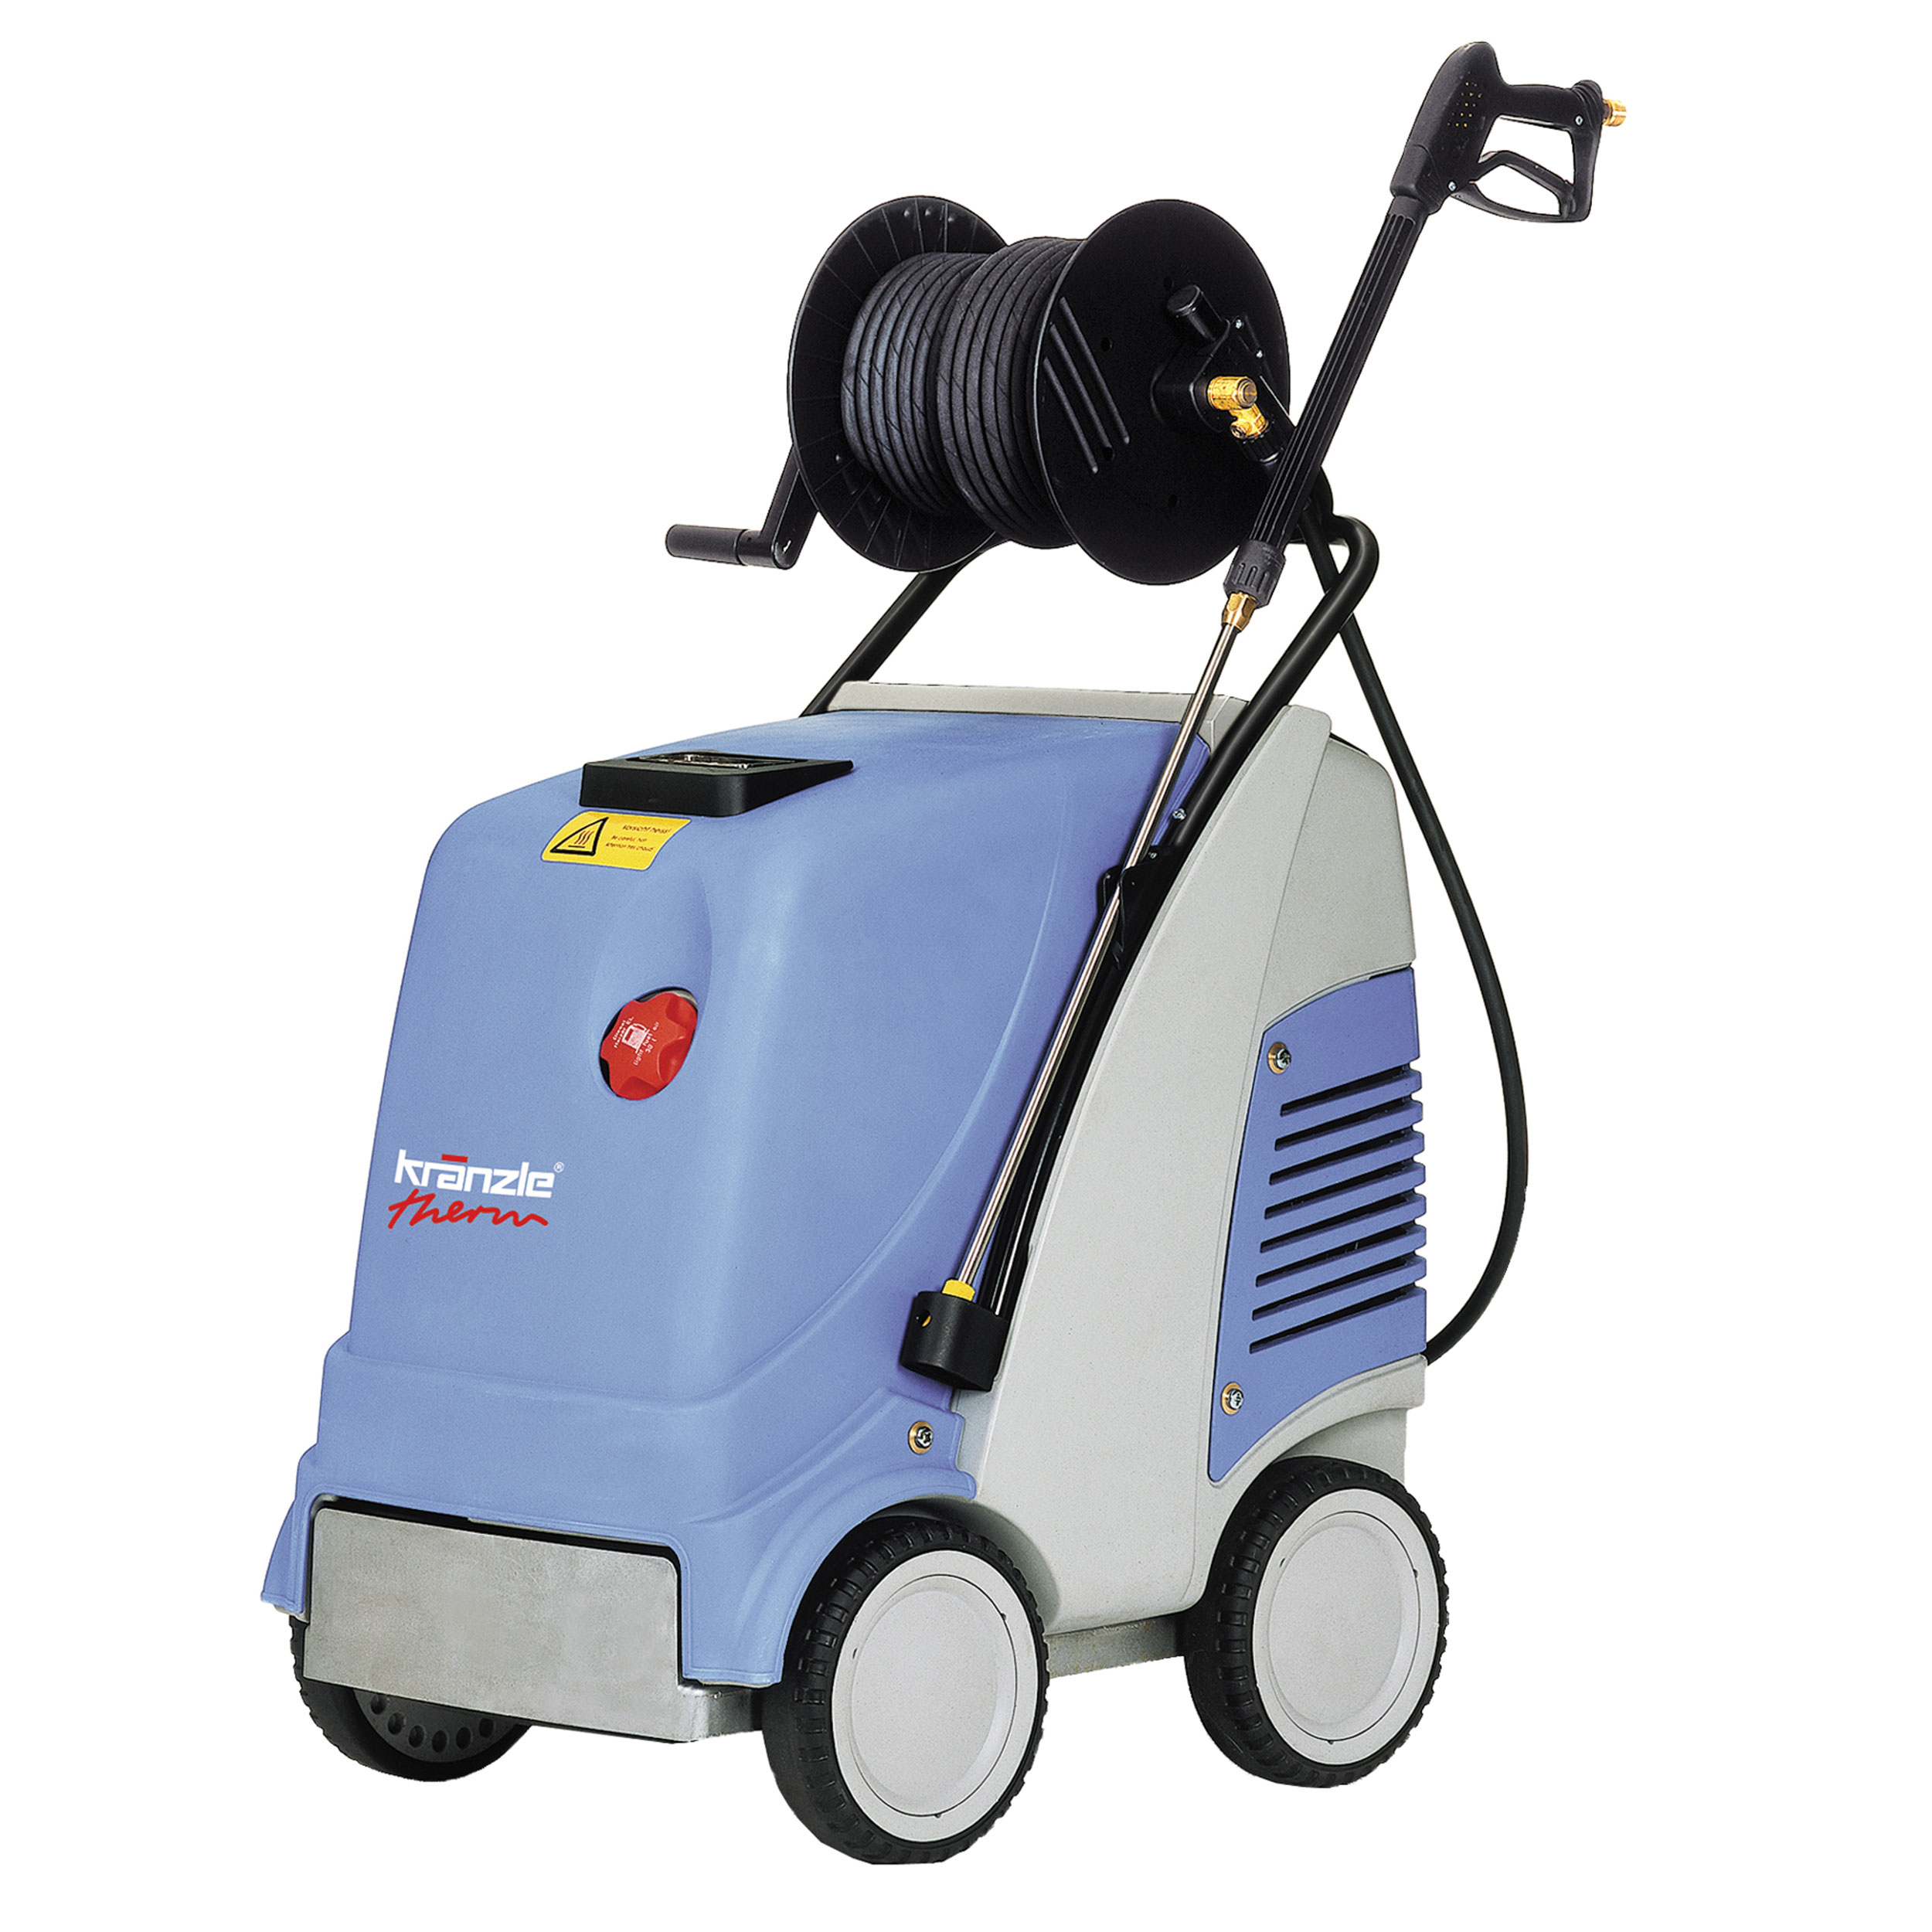 Thermc 13/180tst Pressure Washer, Hot Water, 220v, 15a, 3ph